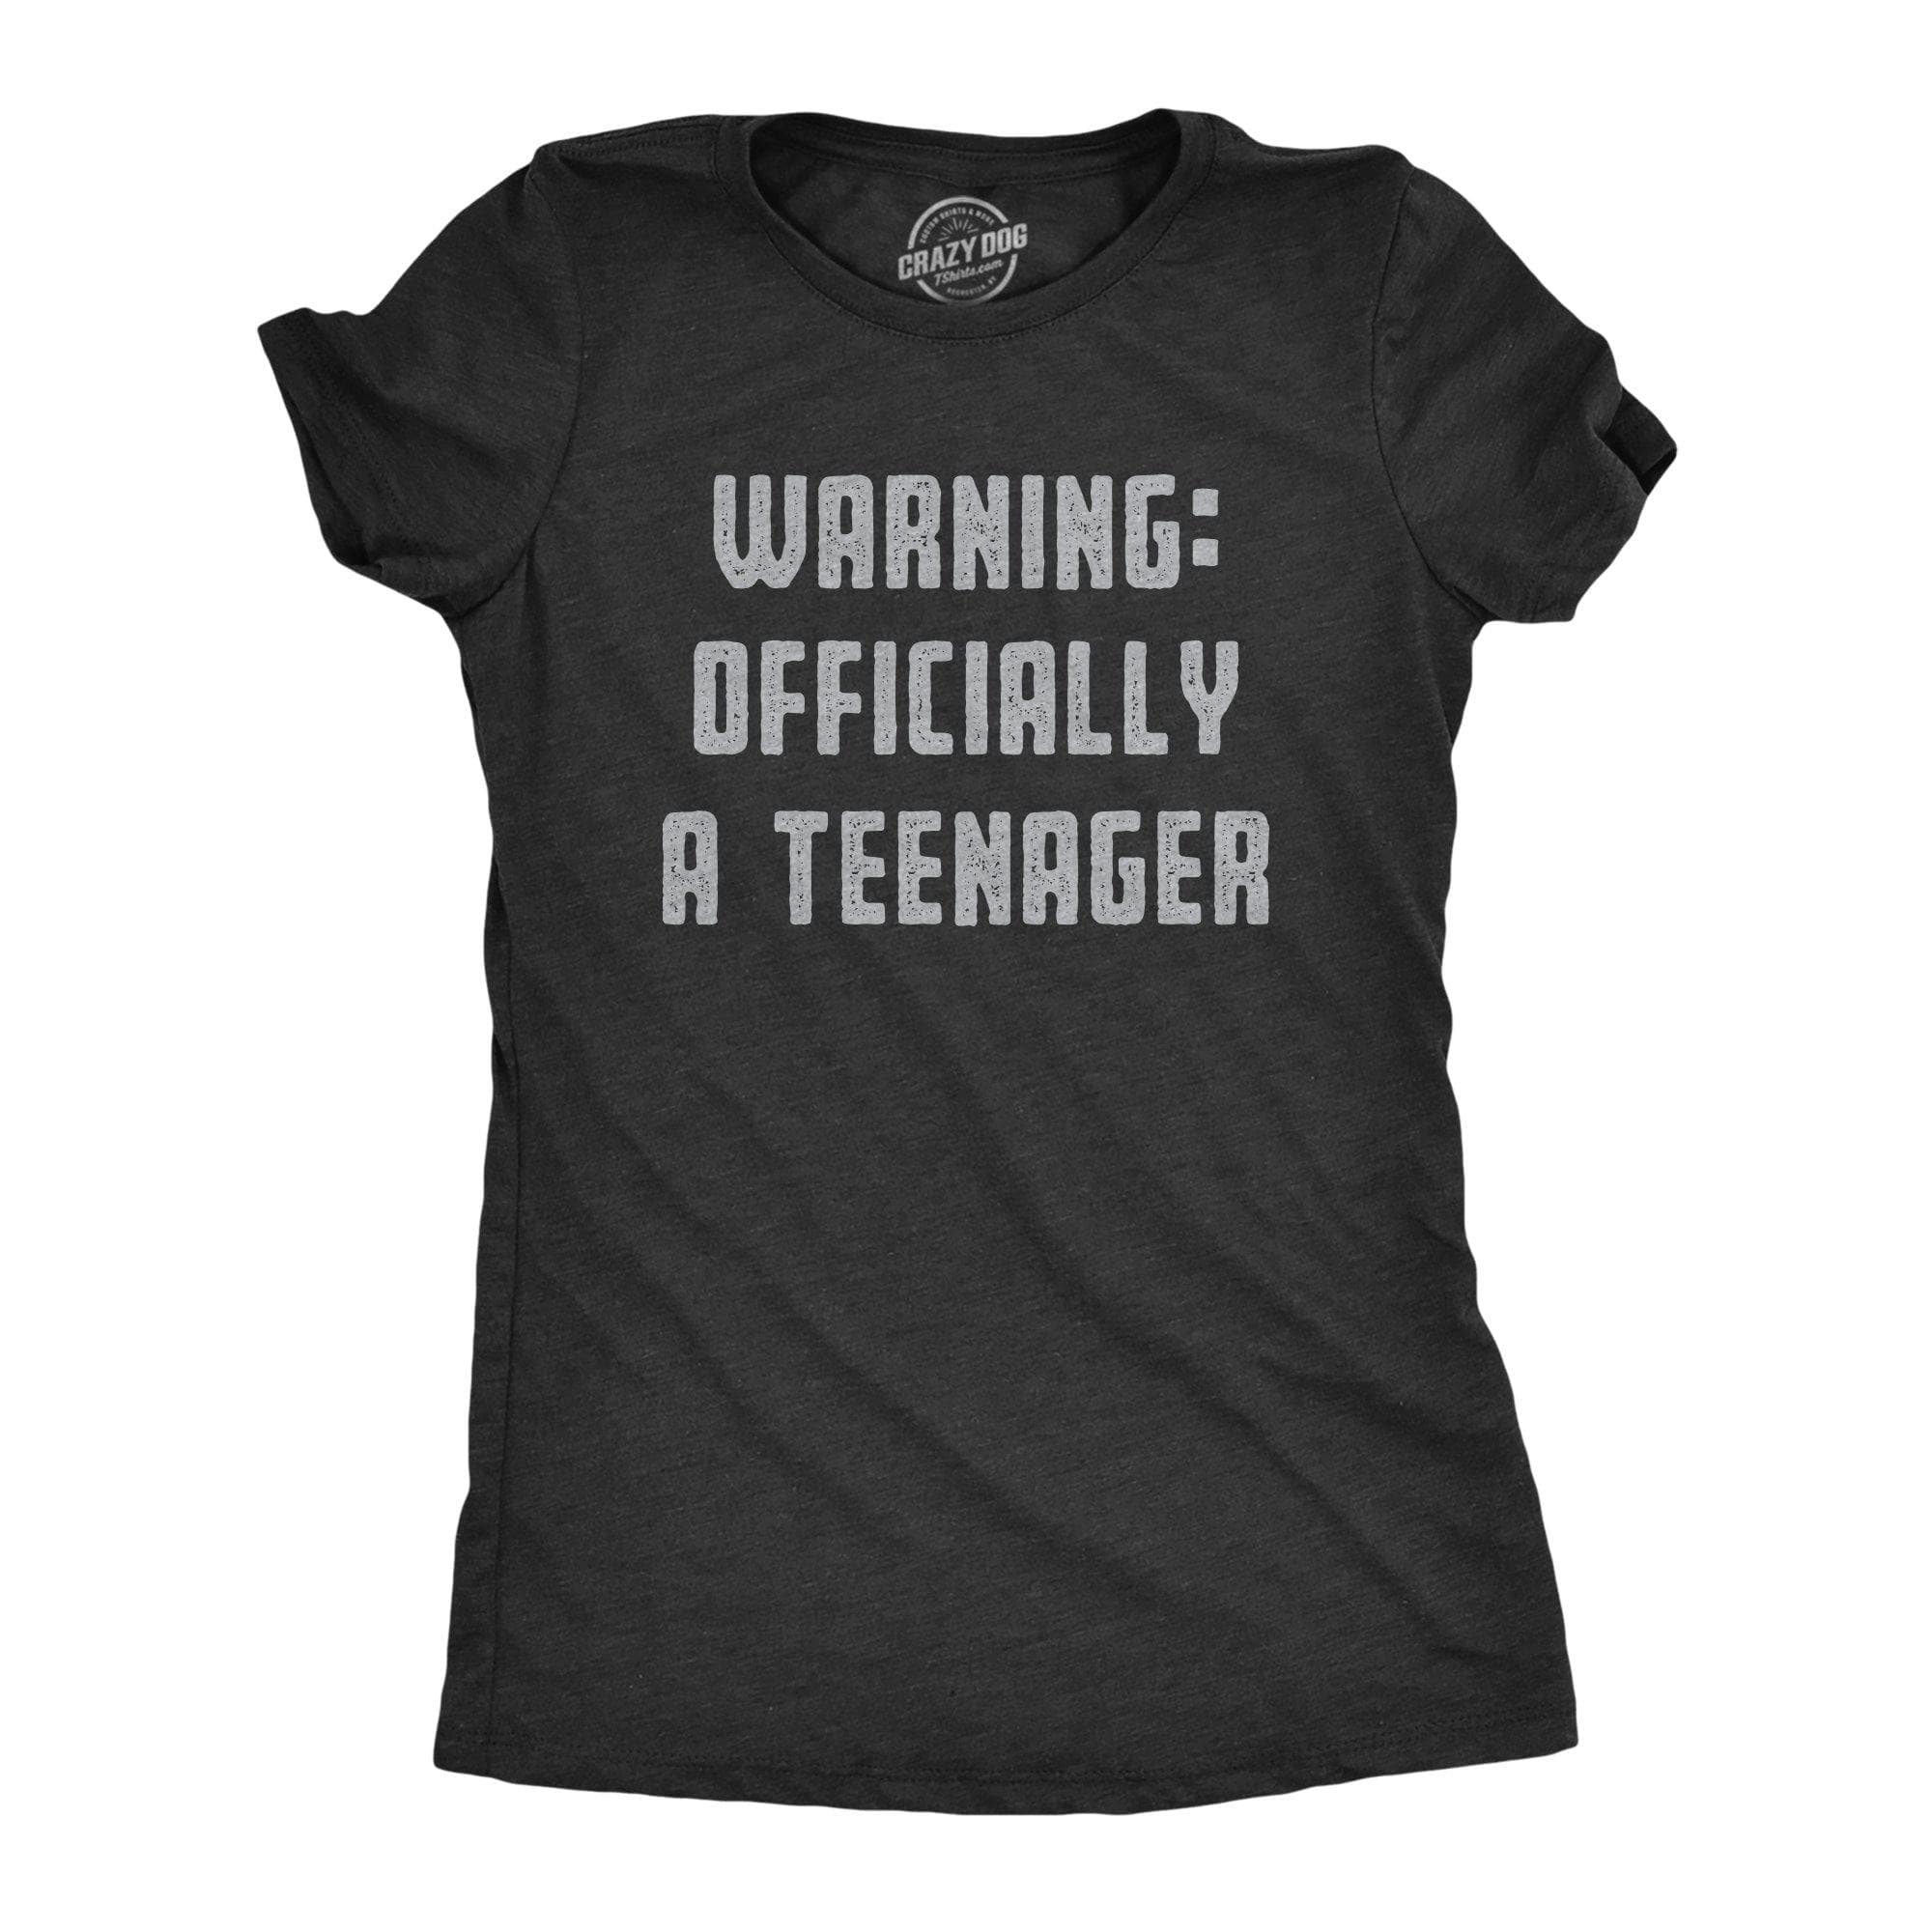 Warning: Offically A Teenager Women's Tshirt - Crazy Dog T-Shirts